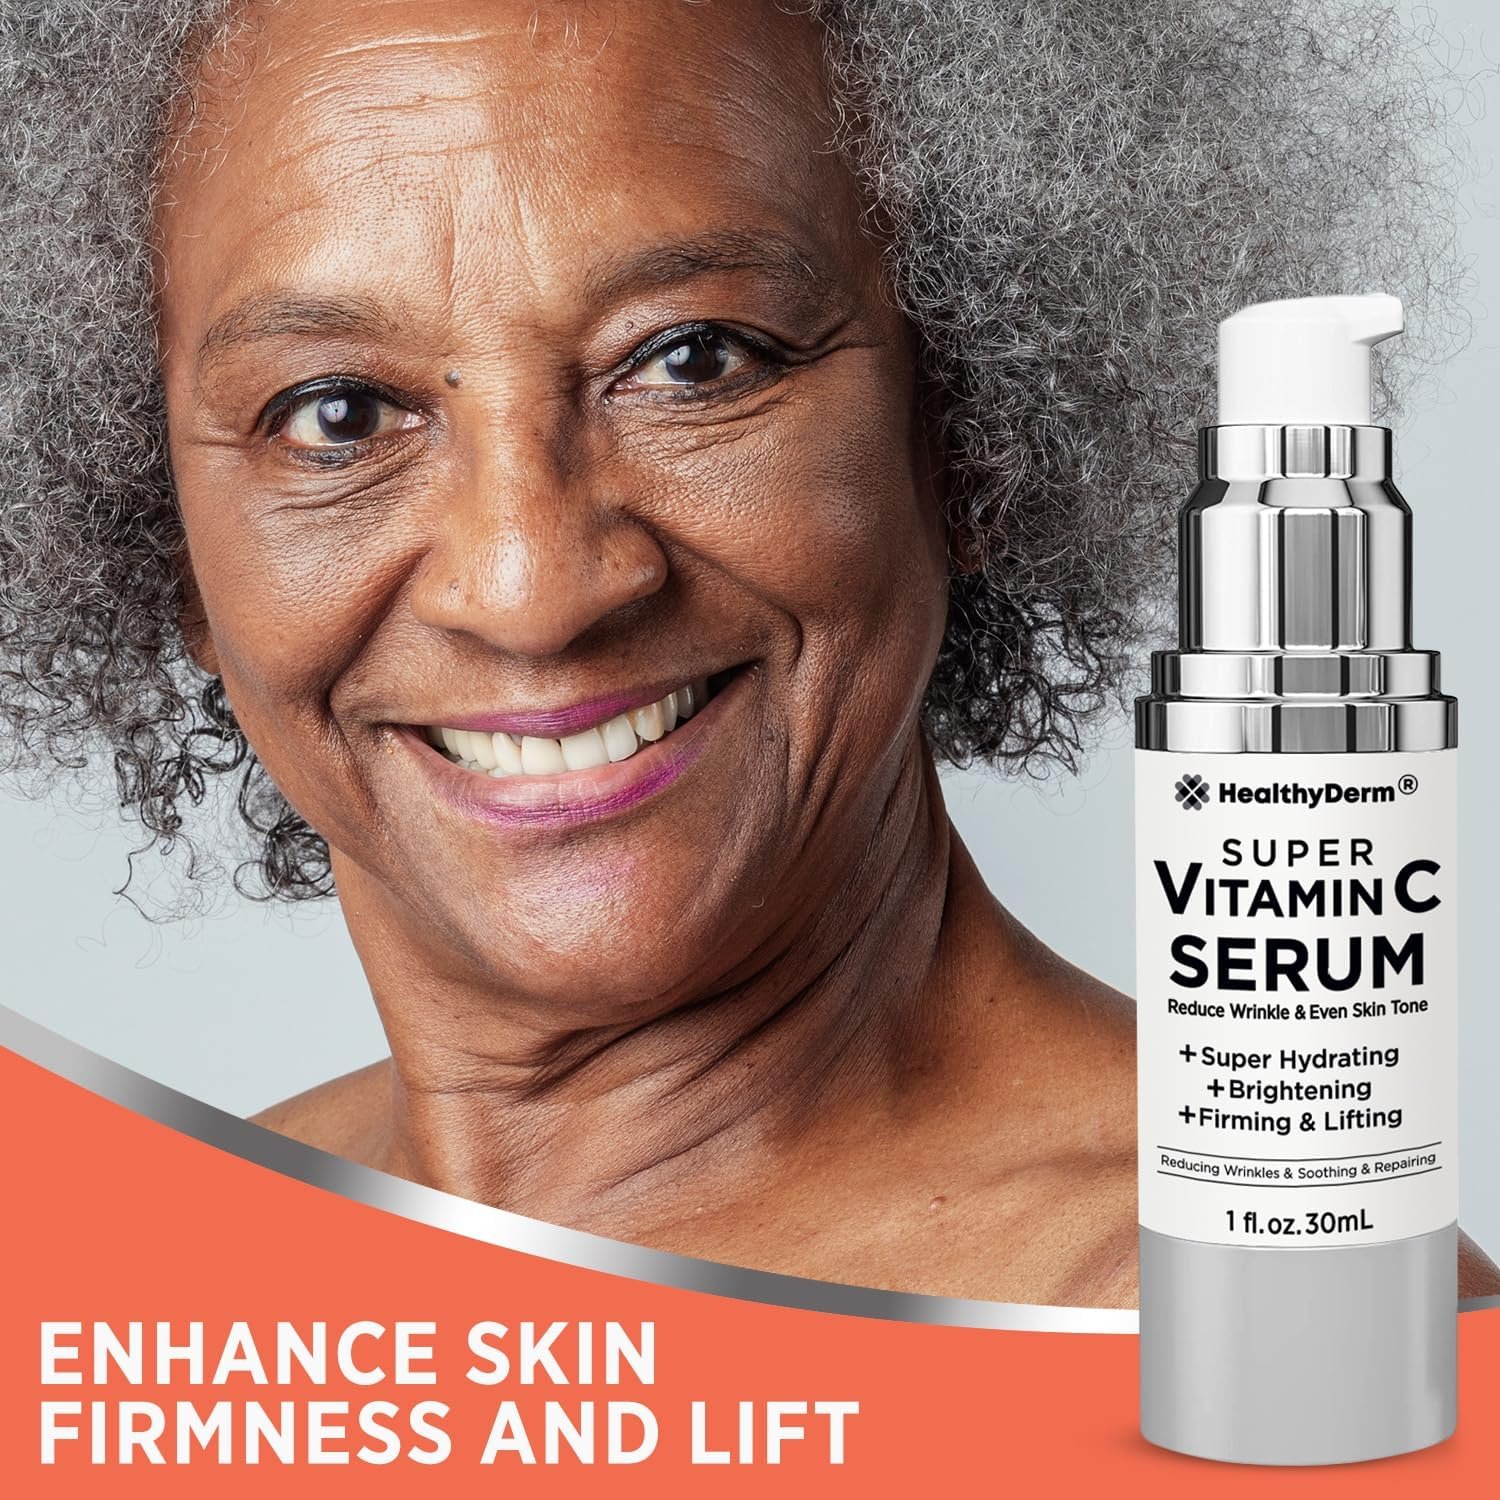 Age-Defying Super Vitamin C Serum for Women Over 50: Niacinamide, Vitamin C, Hyaluronic Acid, Peptides, Vitamin E, Caffeine, Bakuchiol, Brightening, Hydrating, Lifting, Wrinkle  Age Spots Reduction